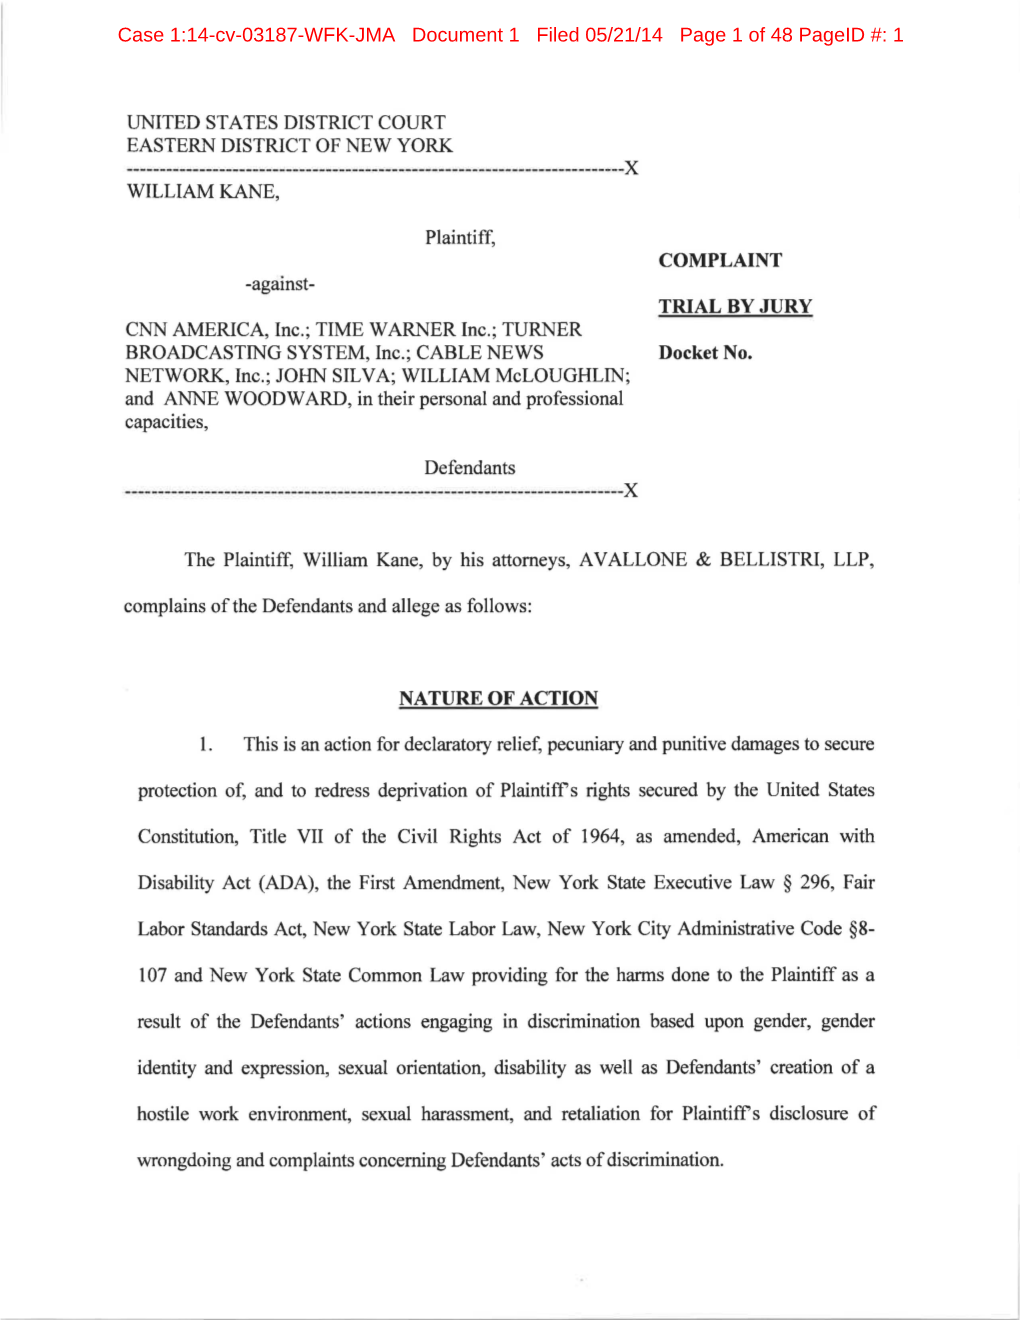 Case 1:14-Cv-03187-WFK-JMA Document 1 Filed 05/21/14 Page 1 of 48 Pageid #: 1